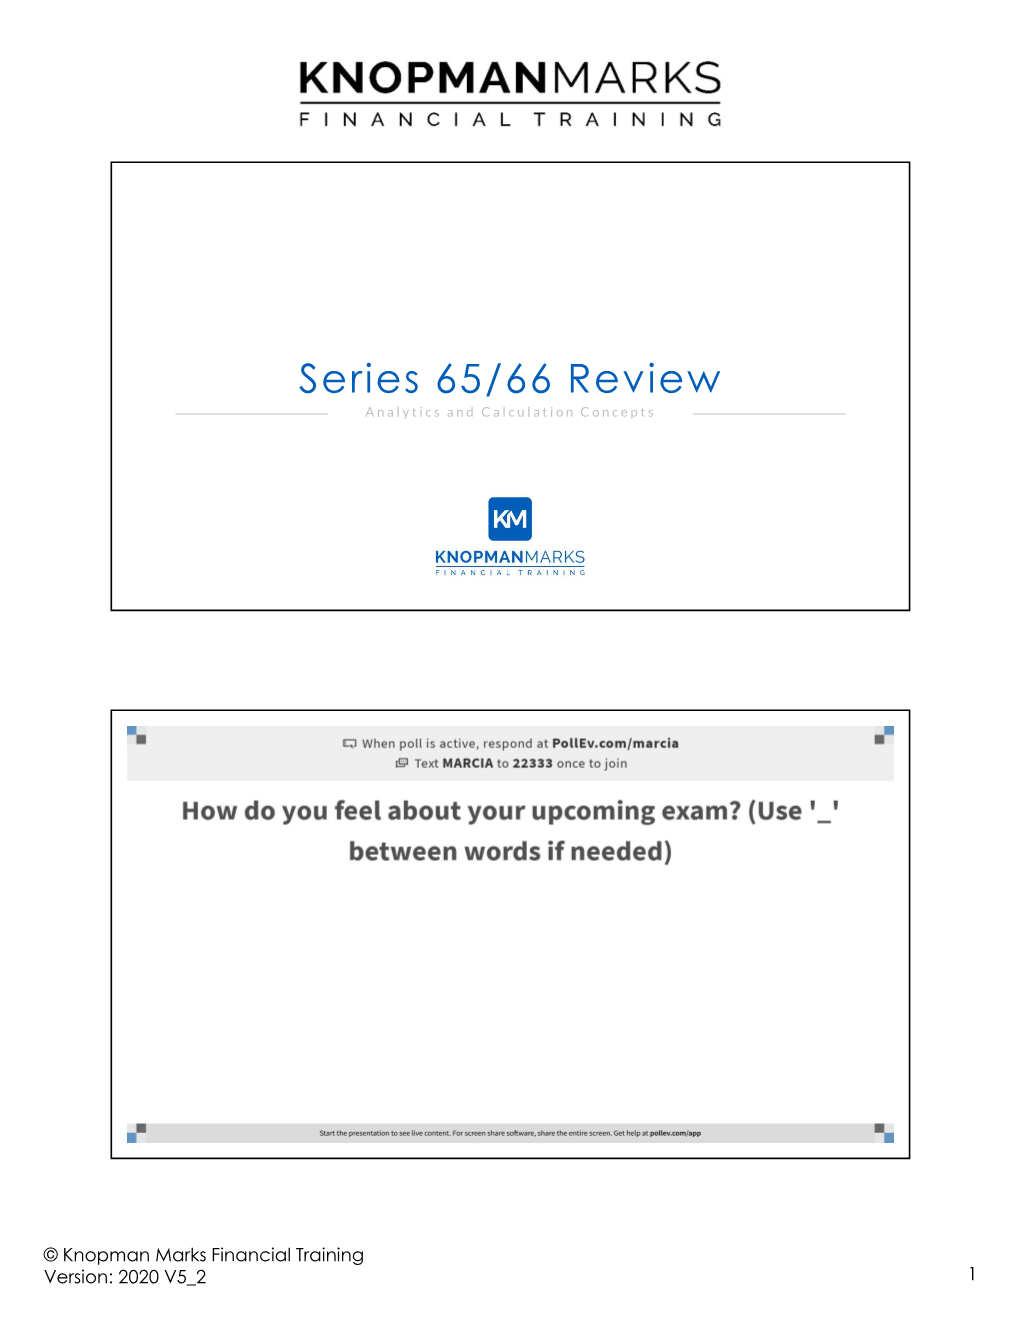 Series 65/66 Review Analytics and Calculation Concepts